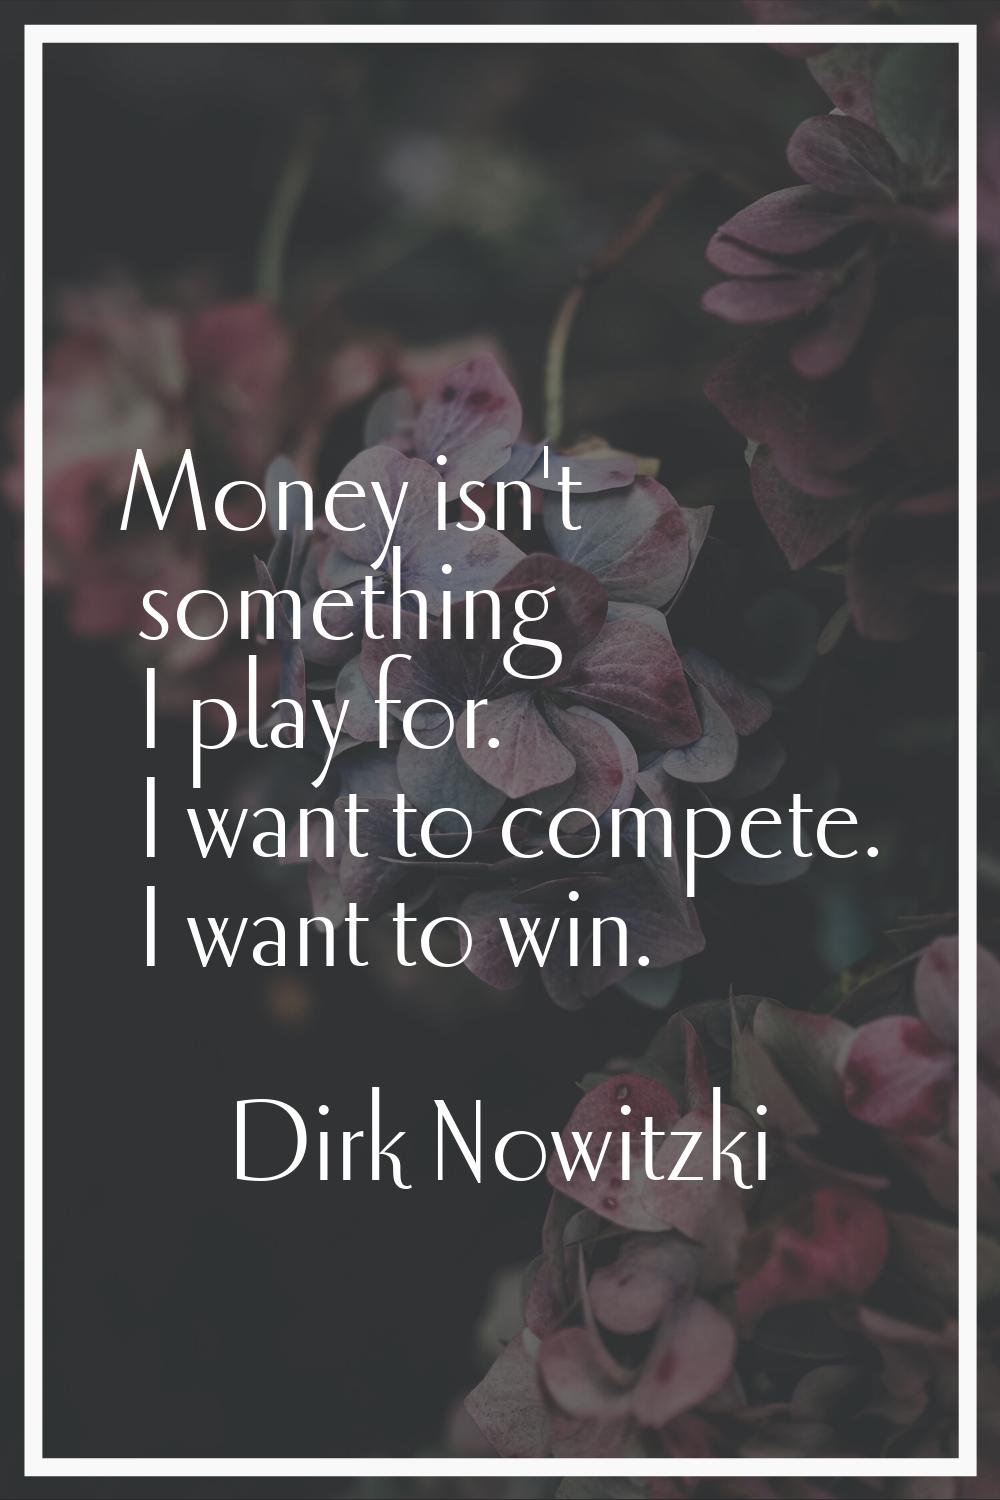 Money isn't something I play for. I want to compete. I want to win.